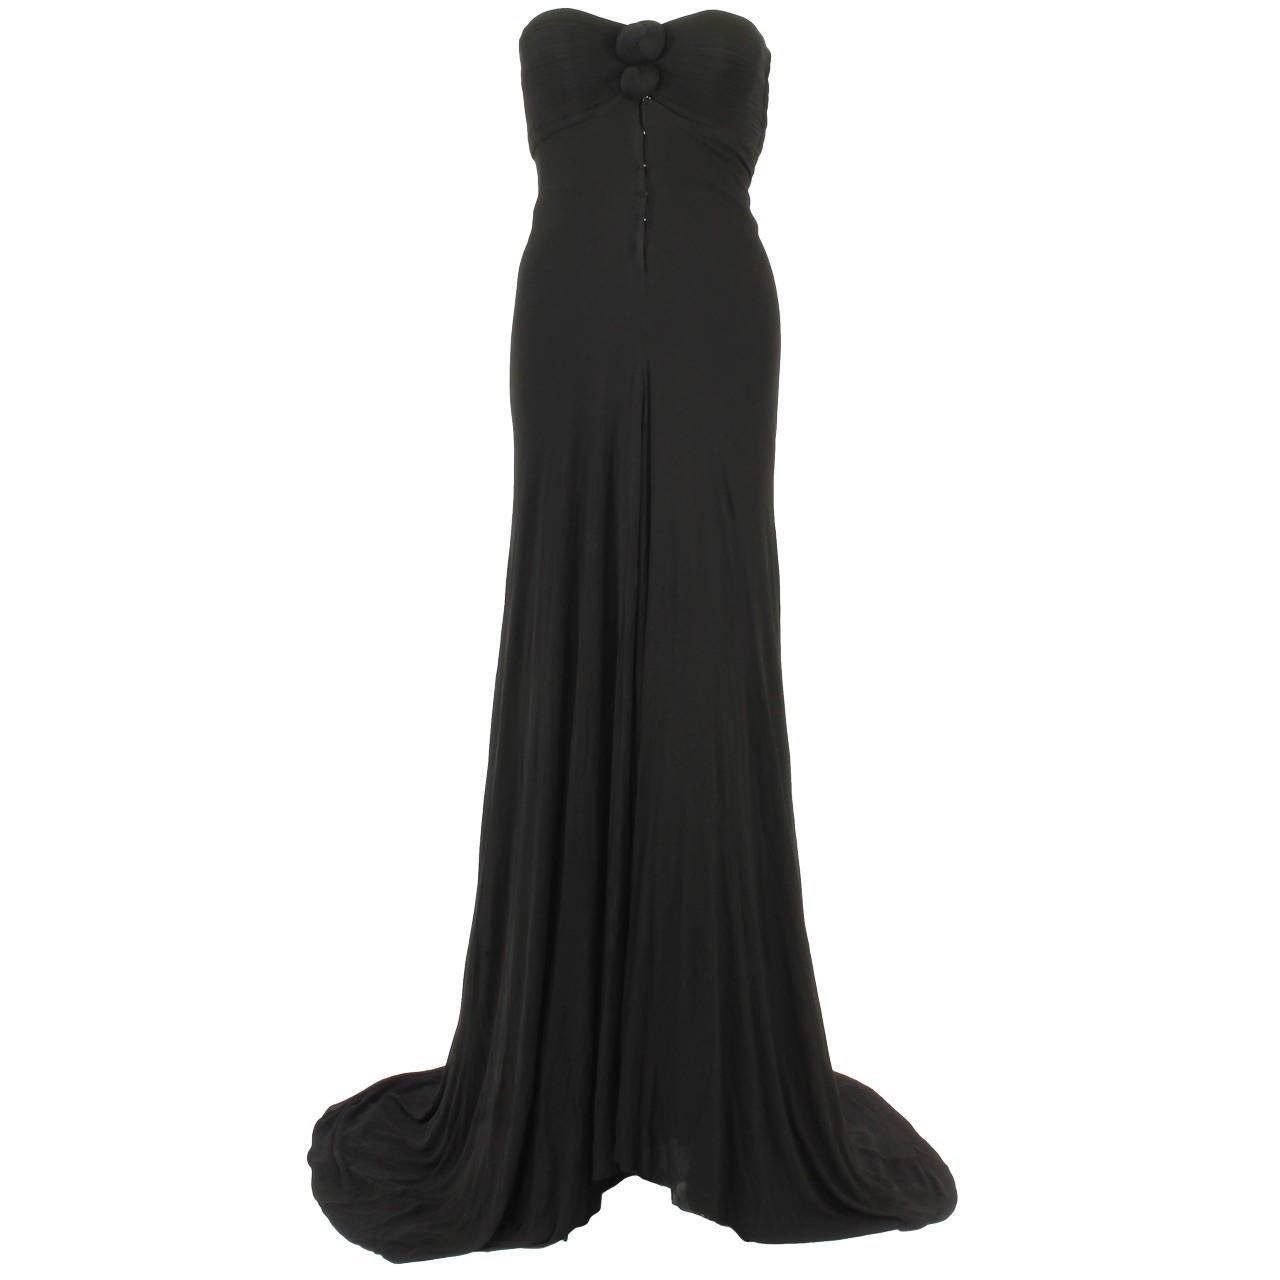 Madame Grès Haute Couture Black Dress, Circa 1962 For Sale at 1stdibs